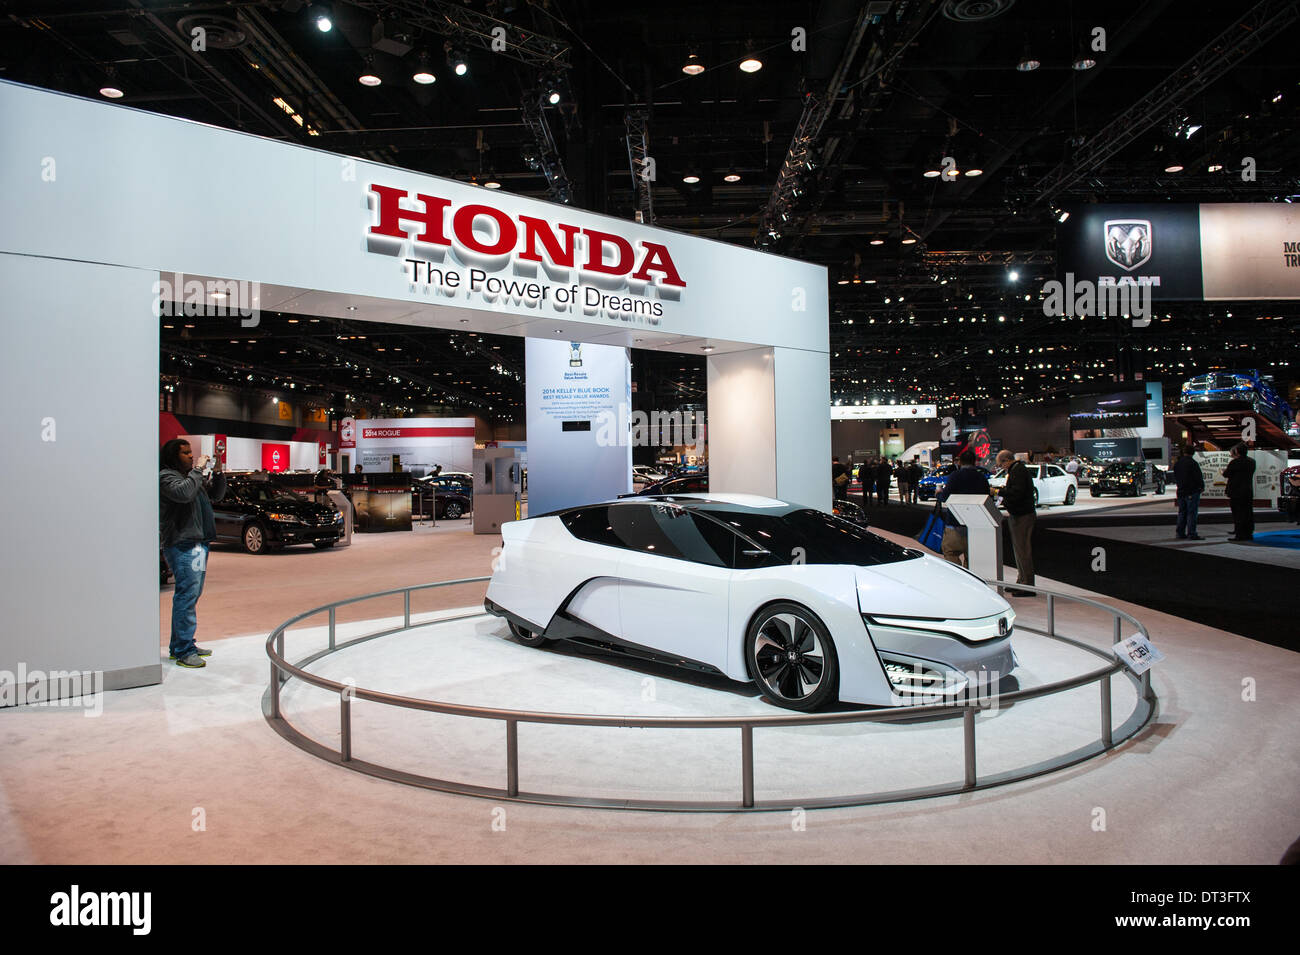 Honda's Showcase Vehicle At The Chicago Auto Show Was This $6.95